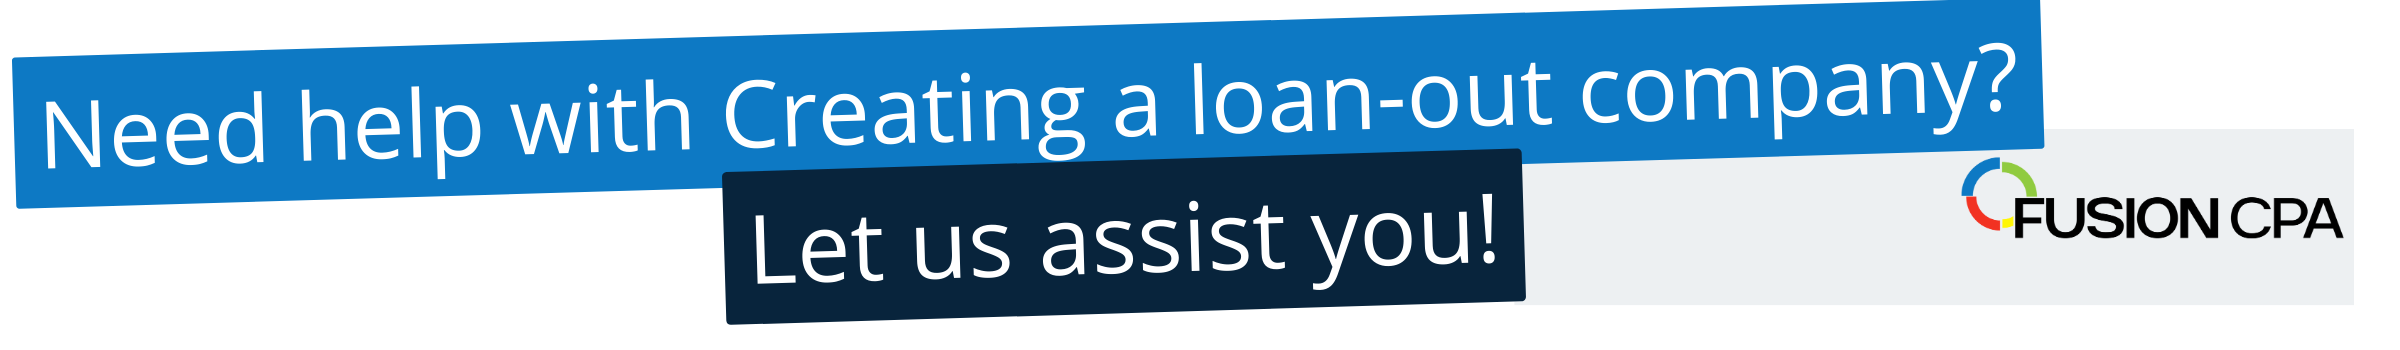 Need help with Creating a loan-out company?